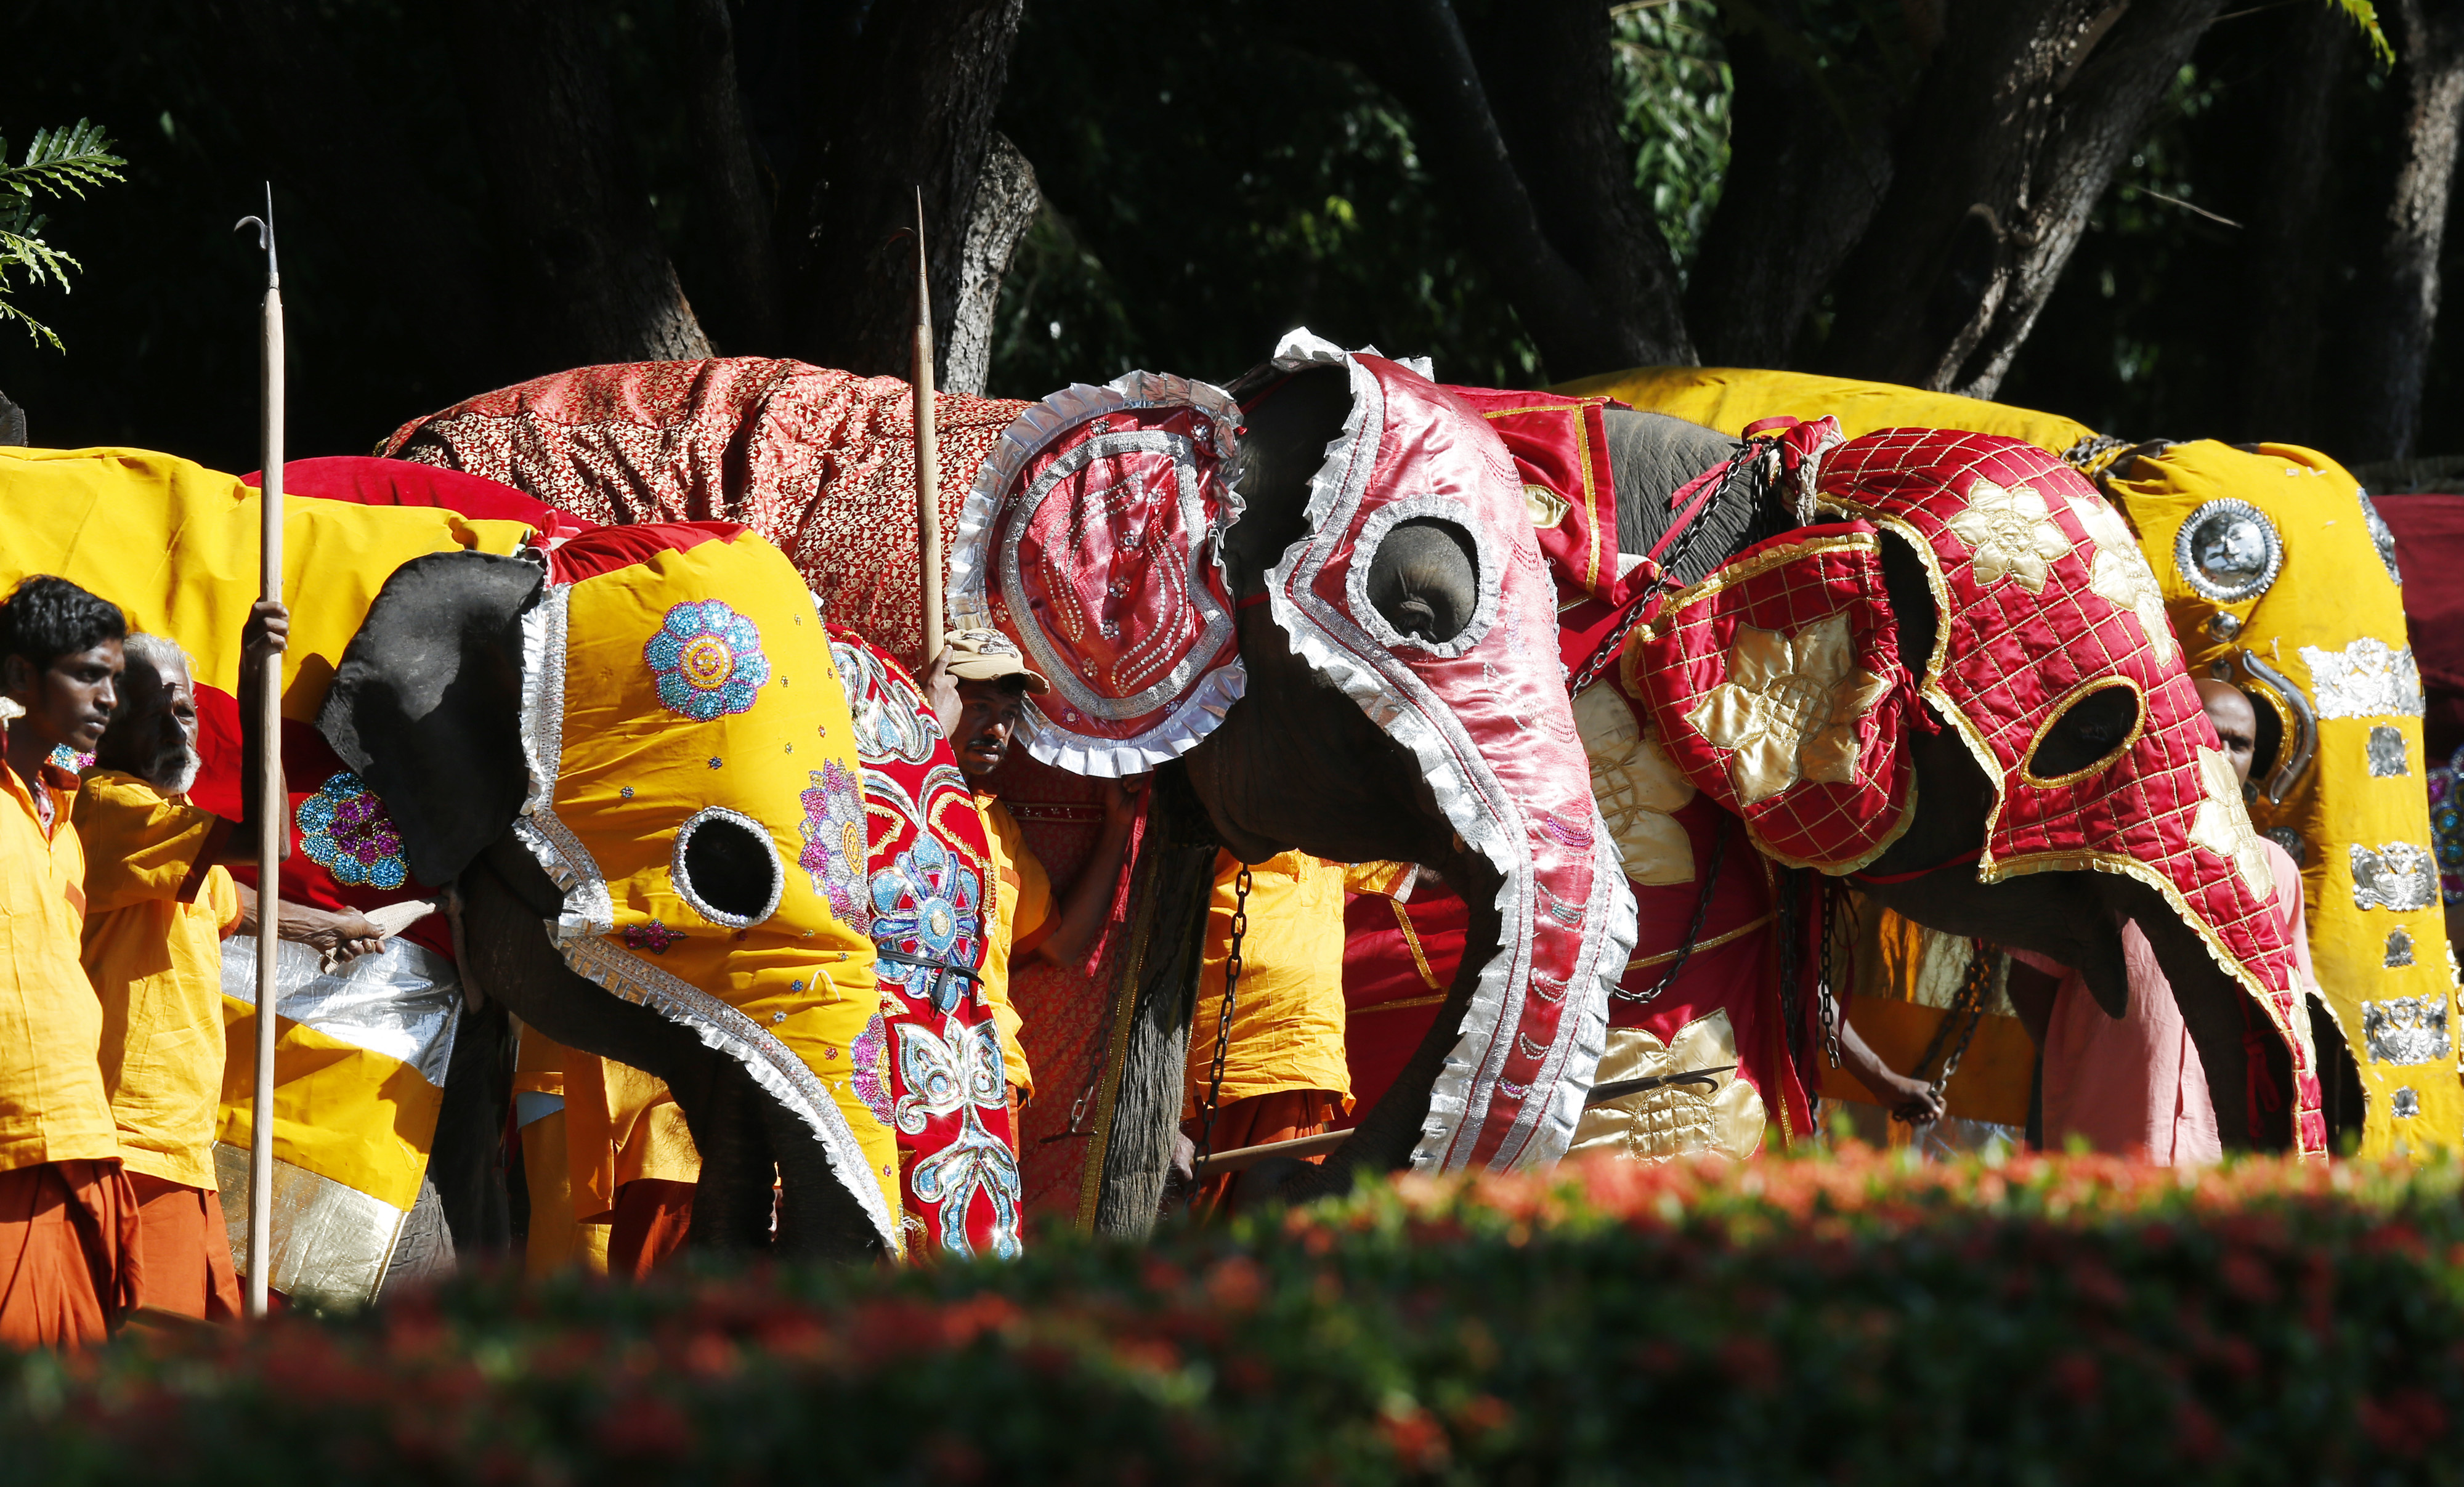 Elephants from a Buddhist temple are present as Pope Francis arrives at the international airport in Colombo, Sri Lanka, Jan. 13. (CNS/Paul Haring)